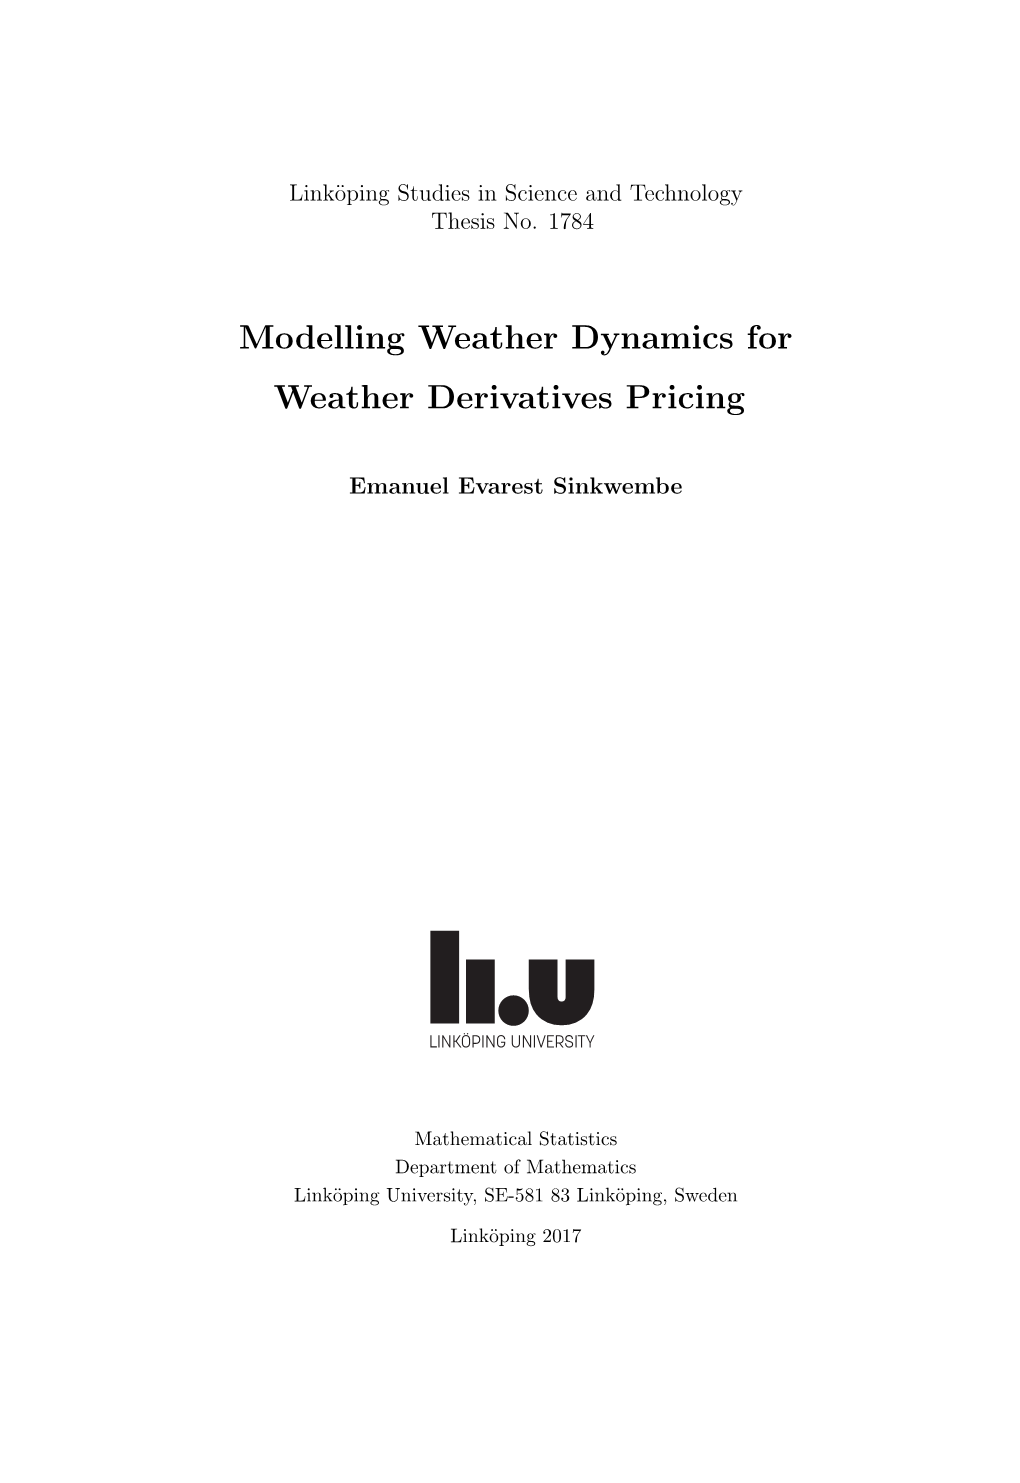 Modelling Weather Dynamics for Weather Derivatives Pricing